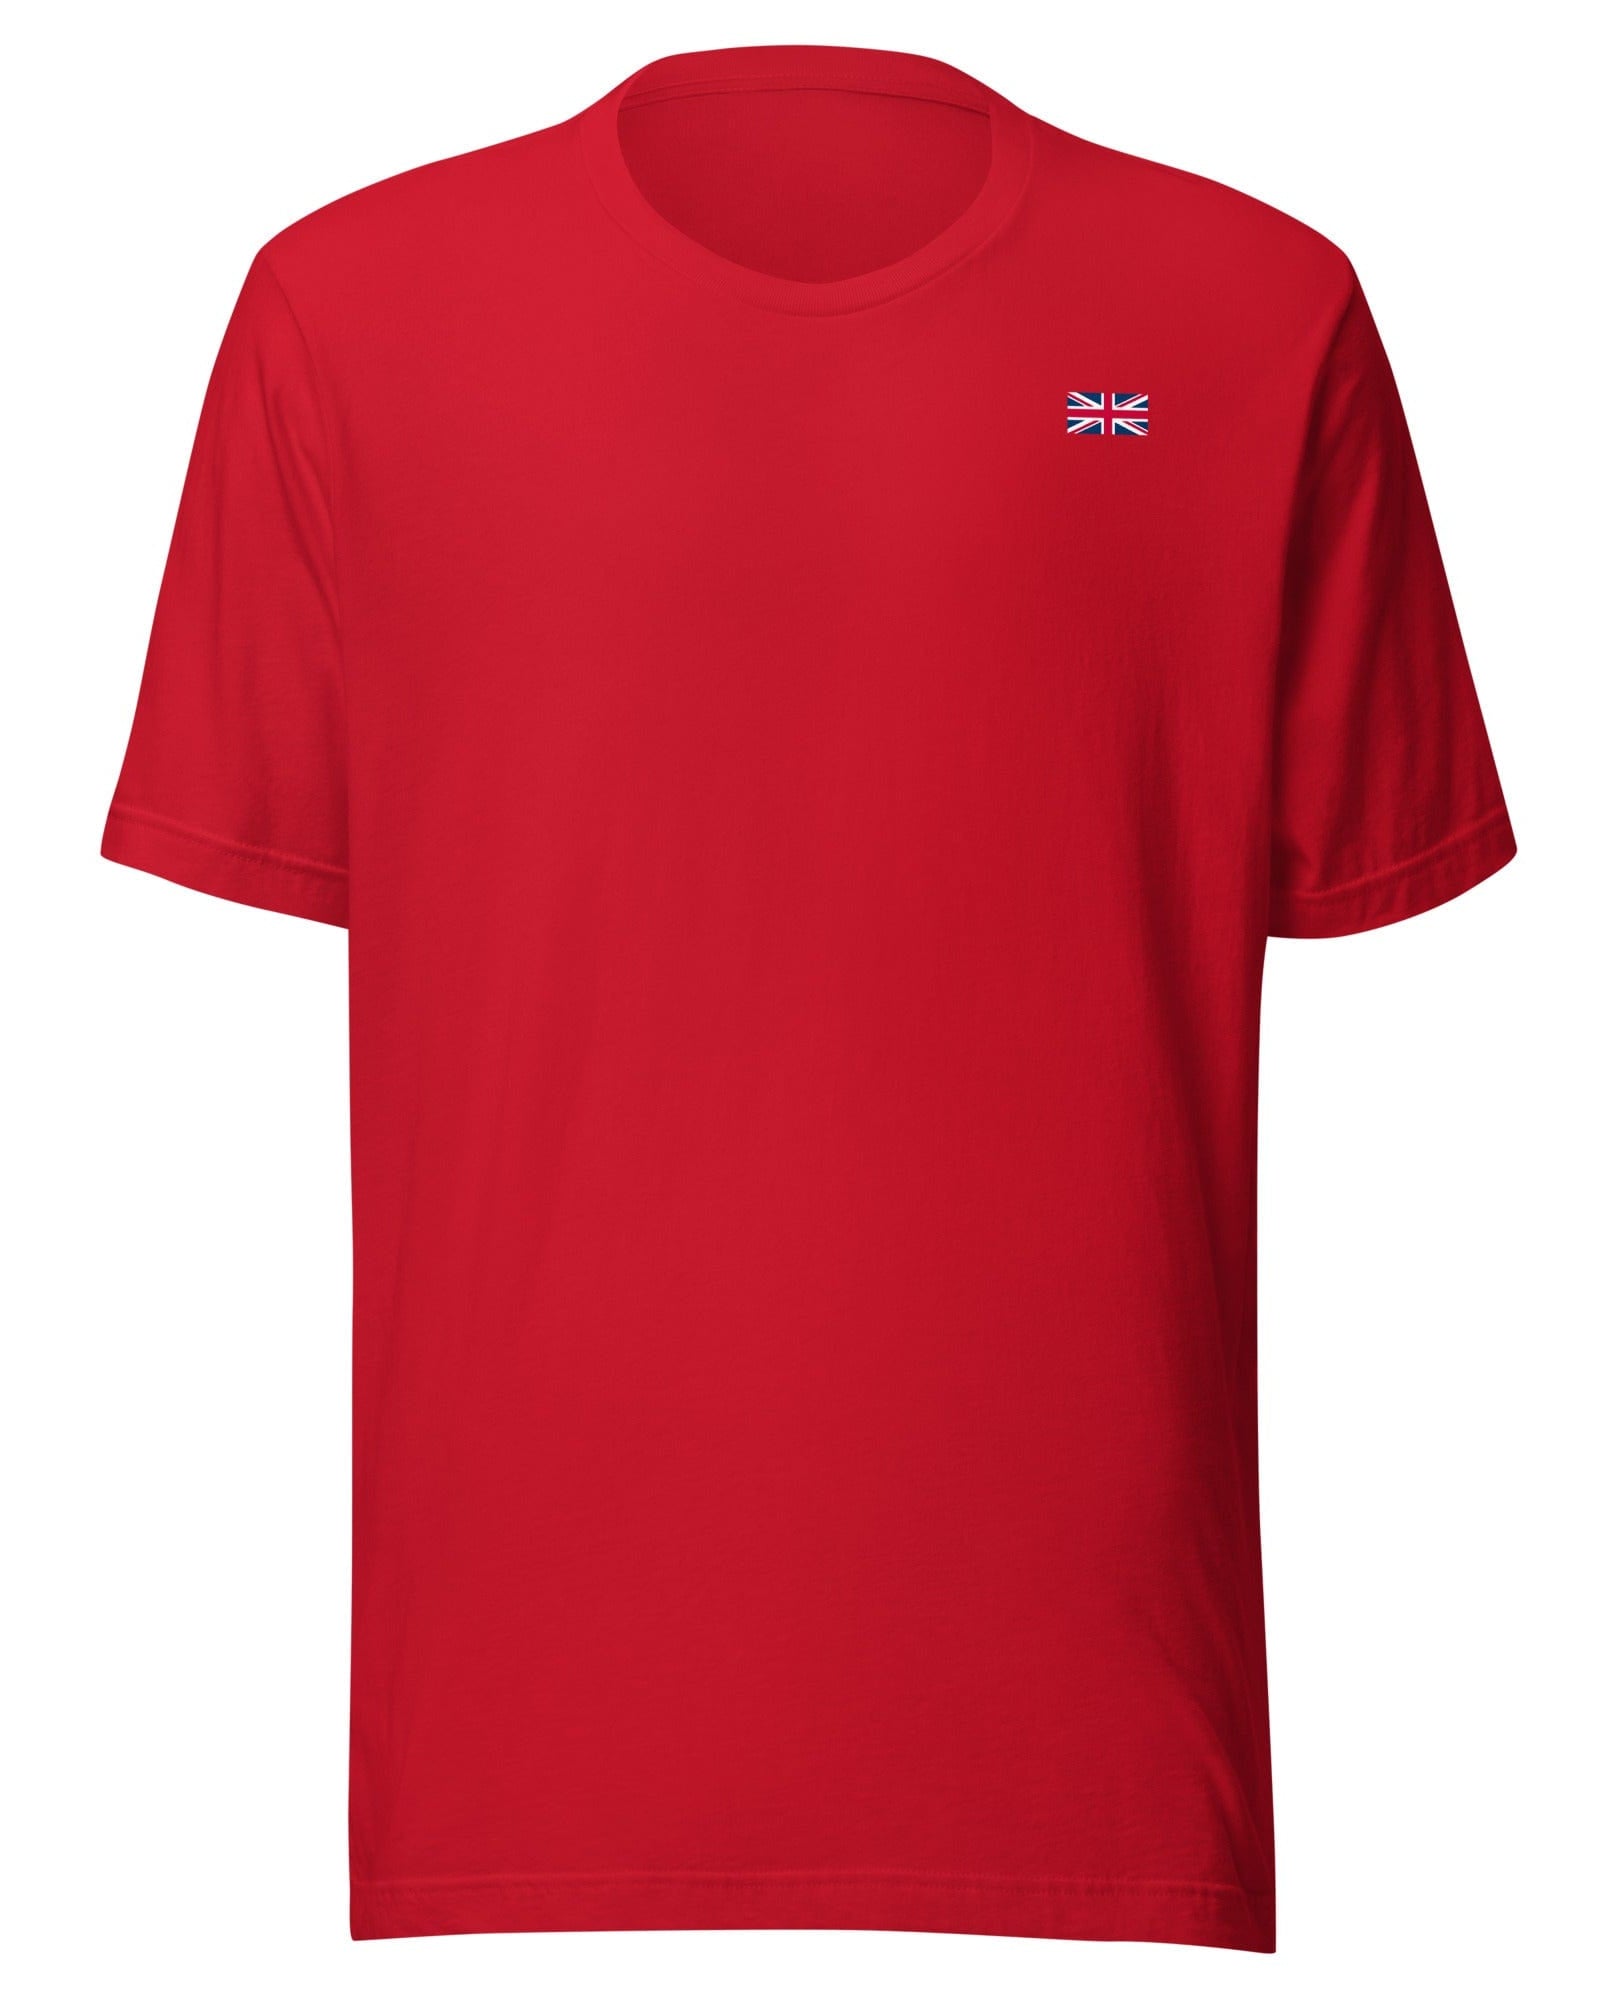 Union Jack T-shirt | Left Chest | Subtle Red / S Shirts & Tops Jolly & Goode